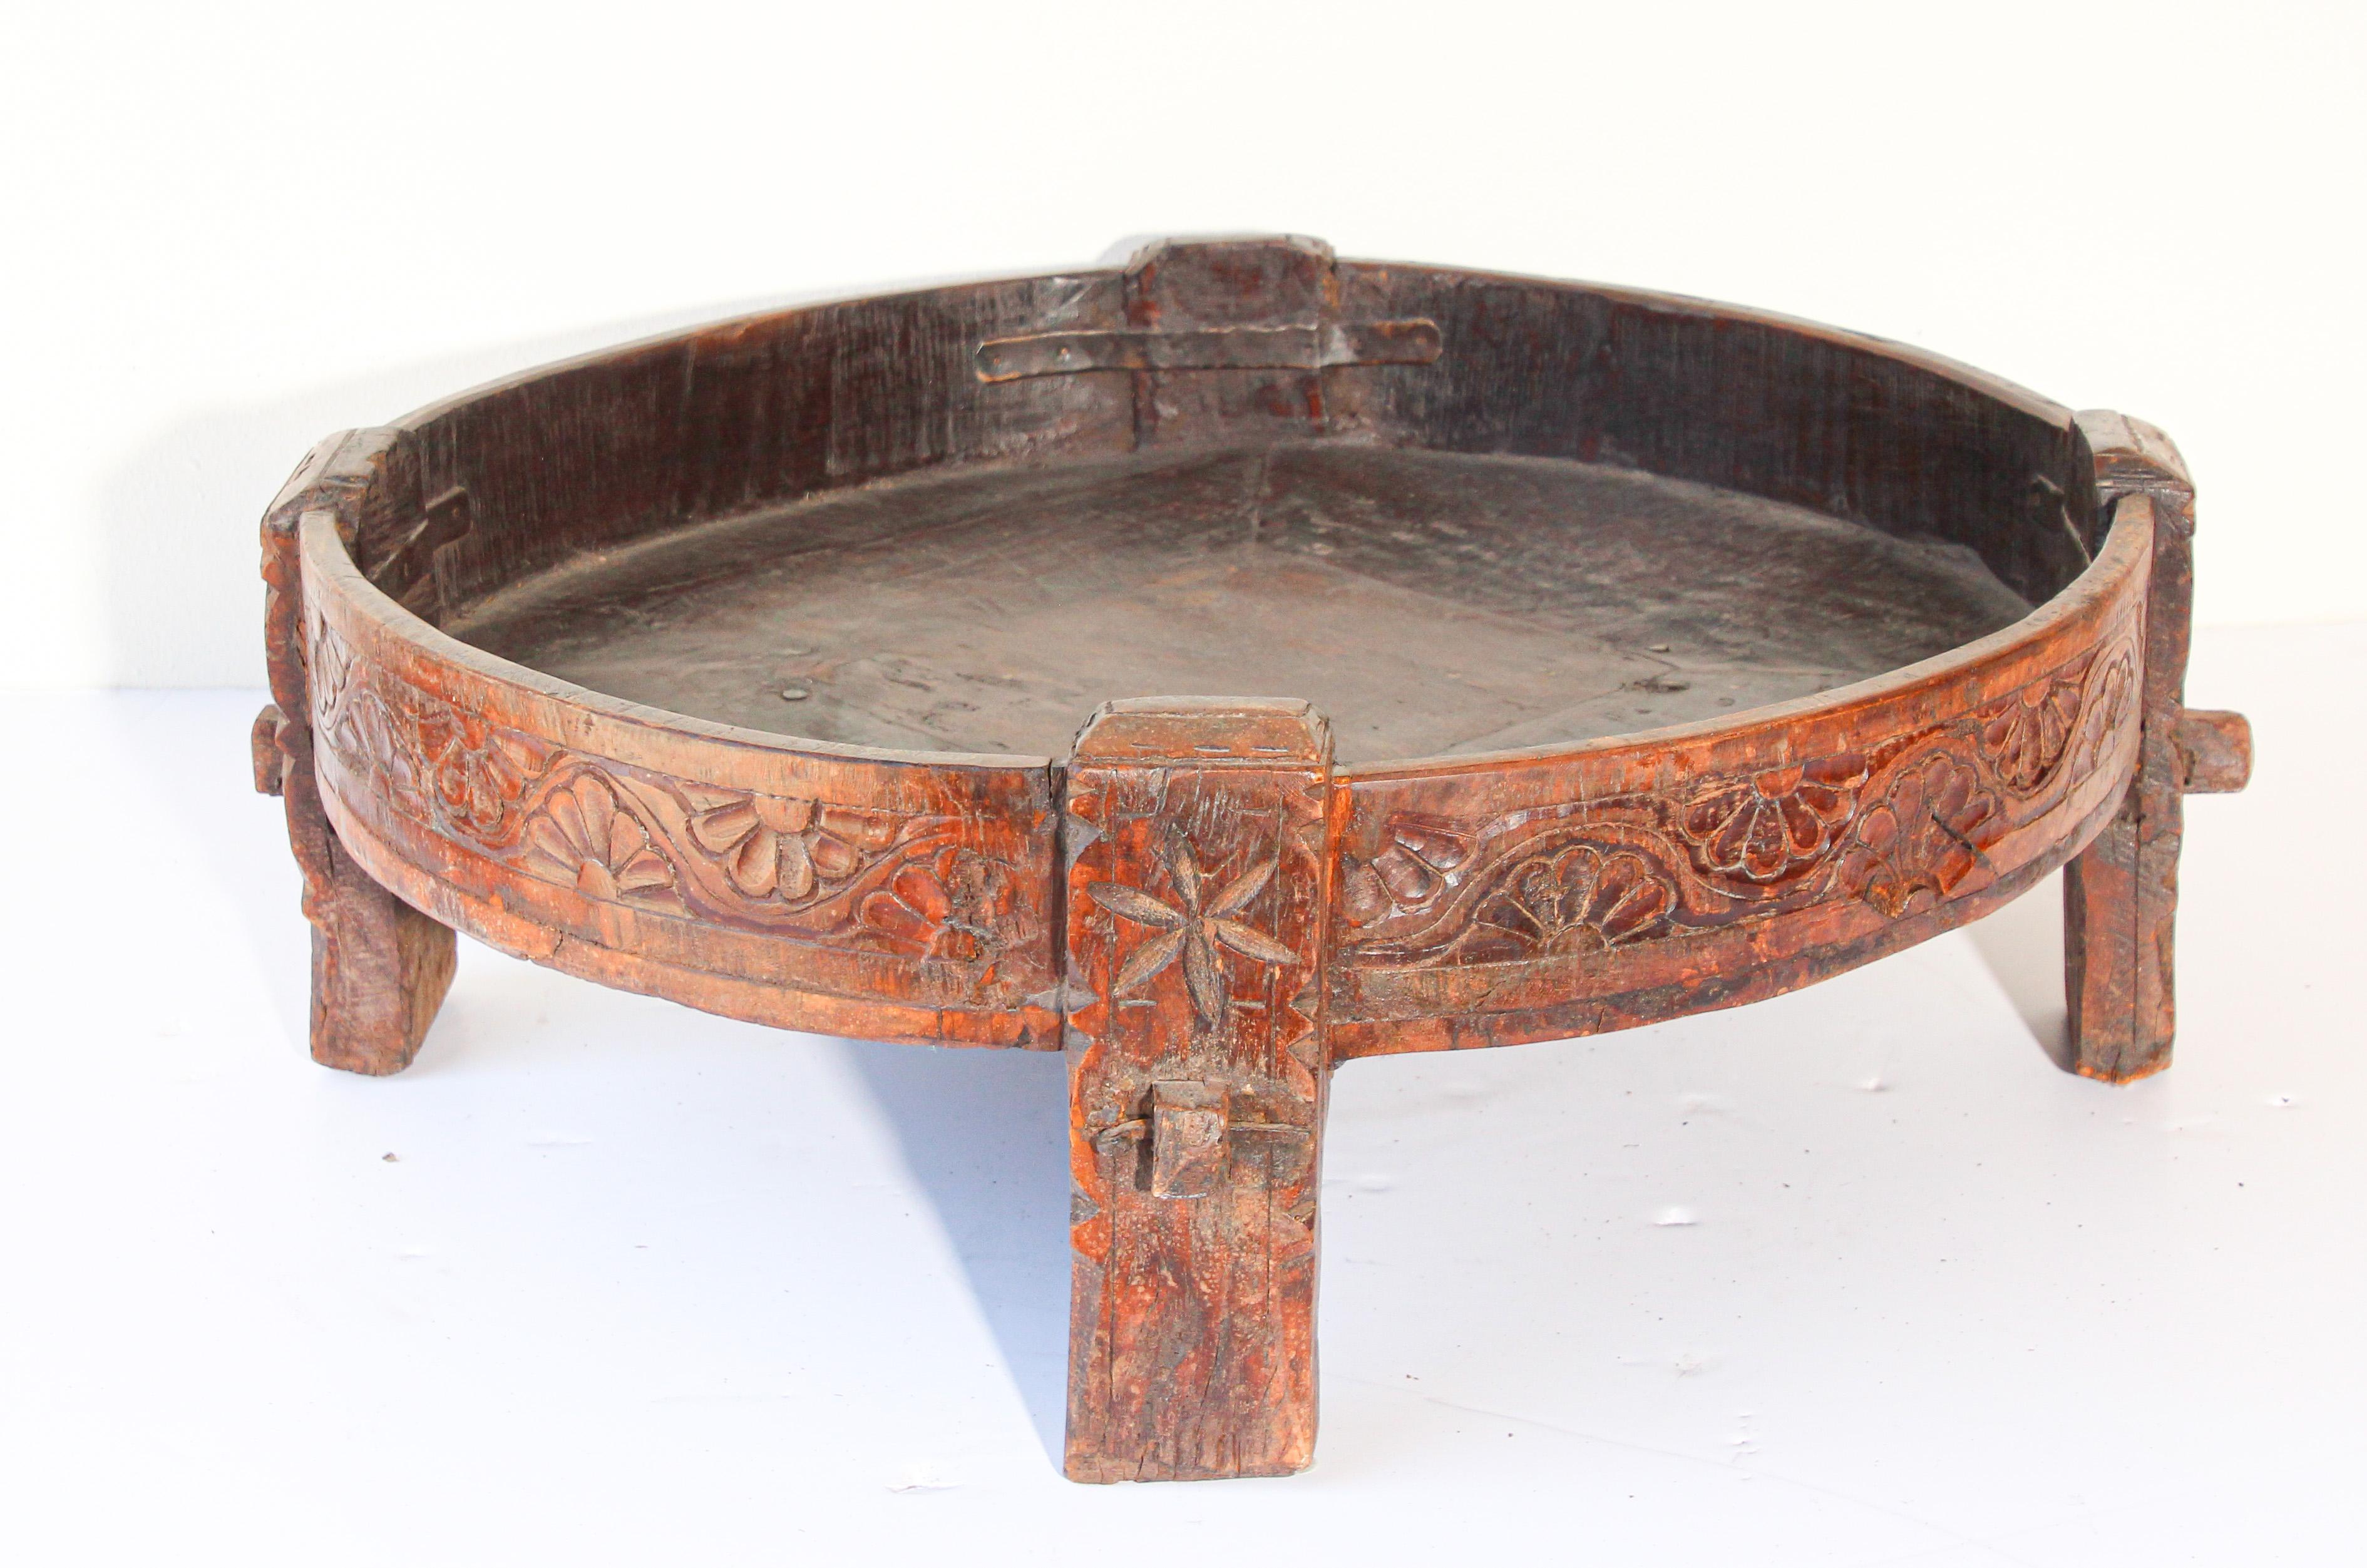 Large antique hand carved wood Indian grinder tribal teak table.
Walnut color hand carved with geometric tribal design.
Handcrafted of wood and iron, hand carved with geometric ethnic tribal design.
Very sturdy rustic wood table with nice patina,